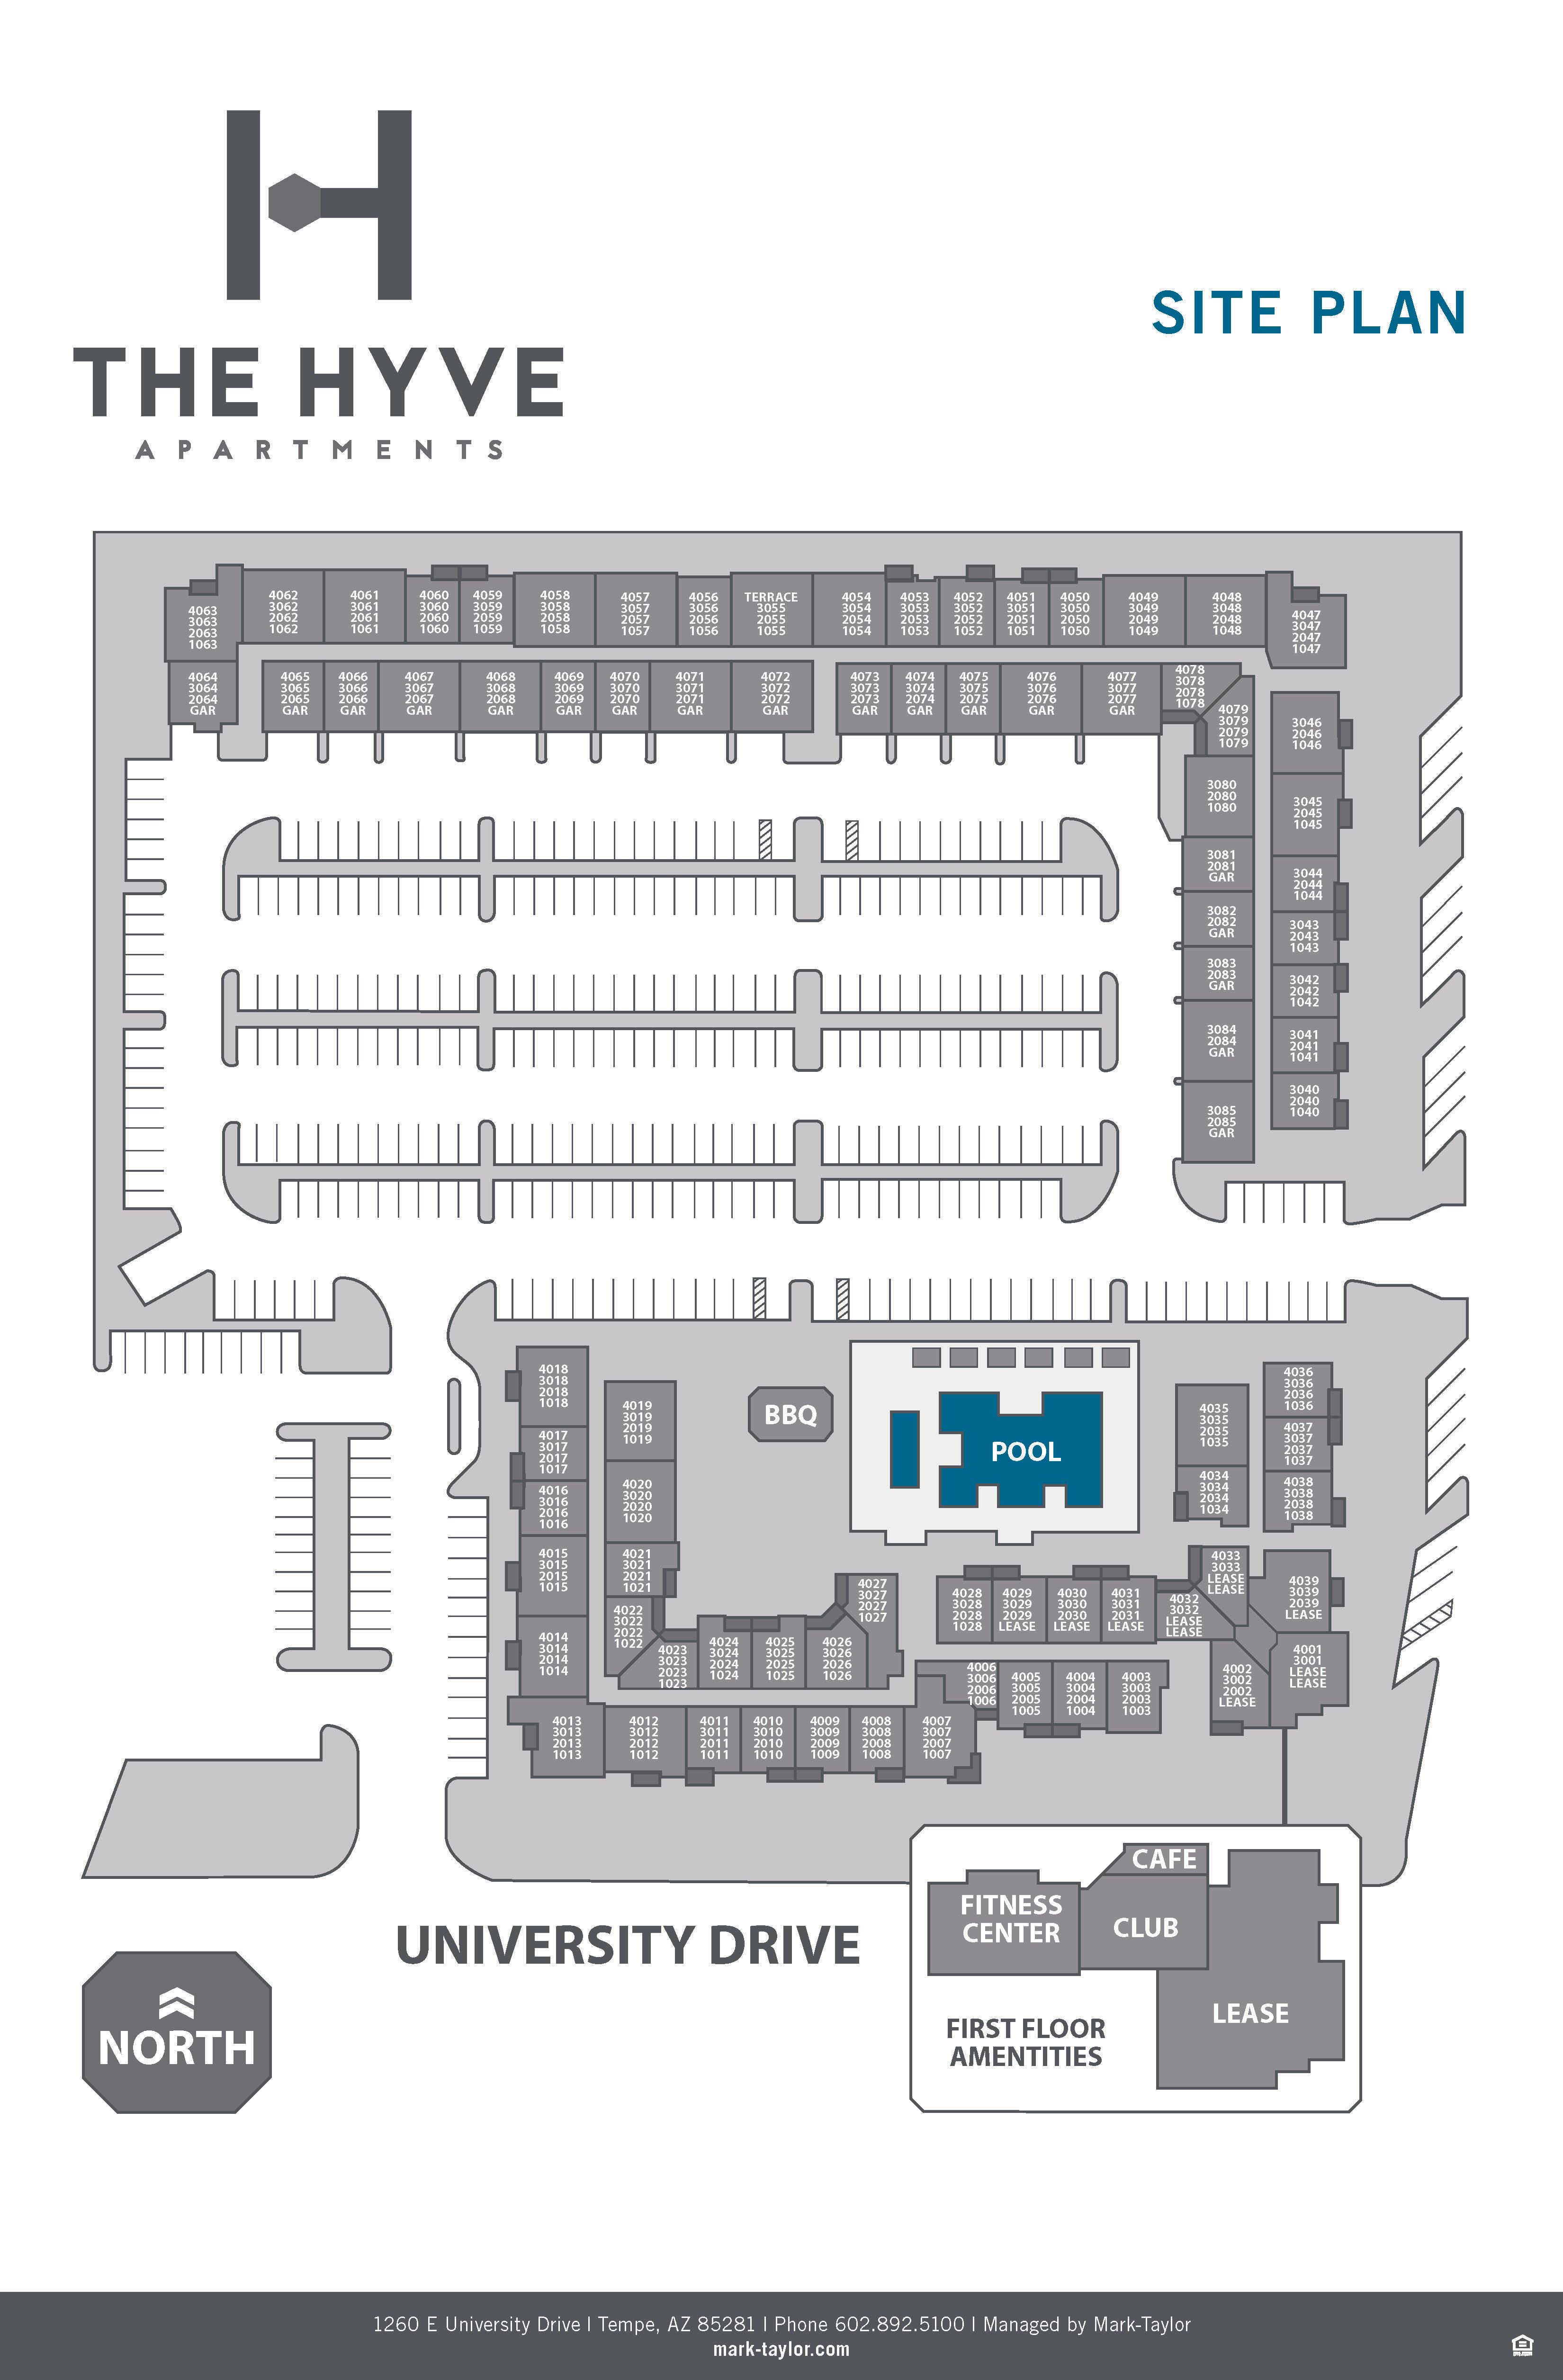 Property Site Map of The Hyve